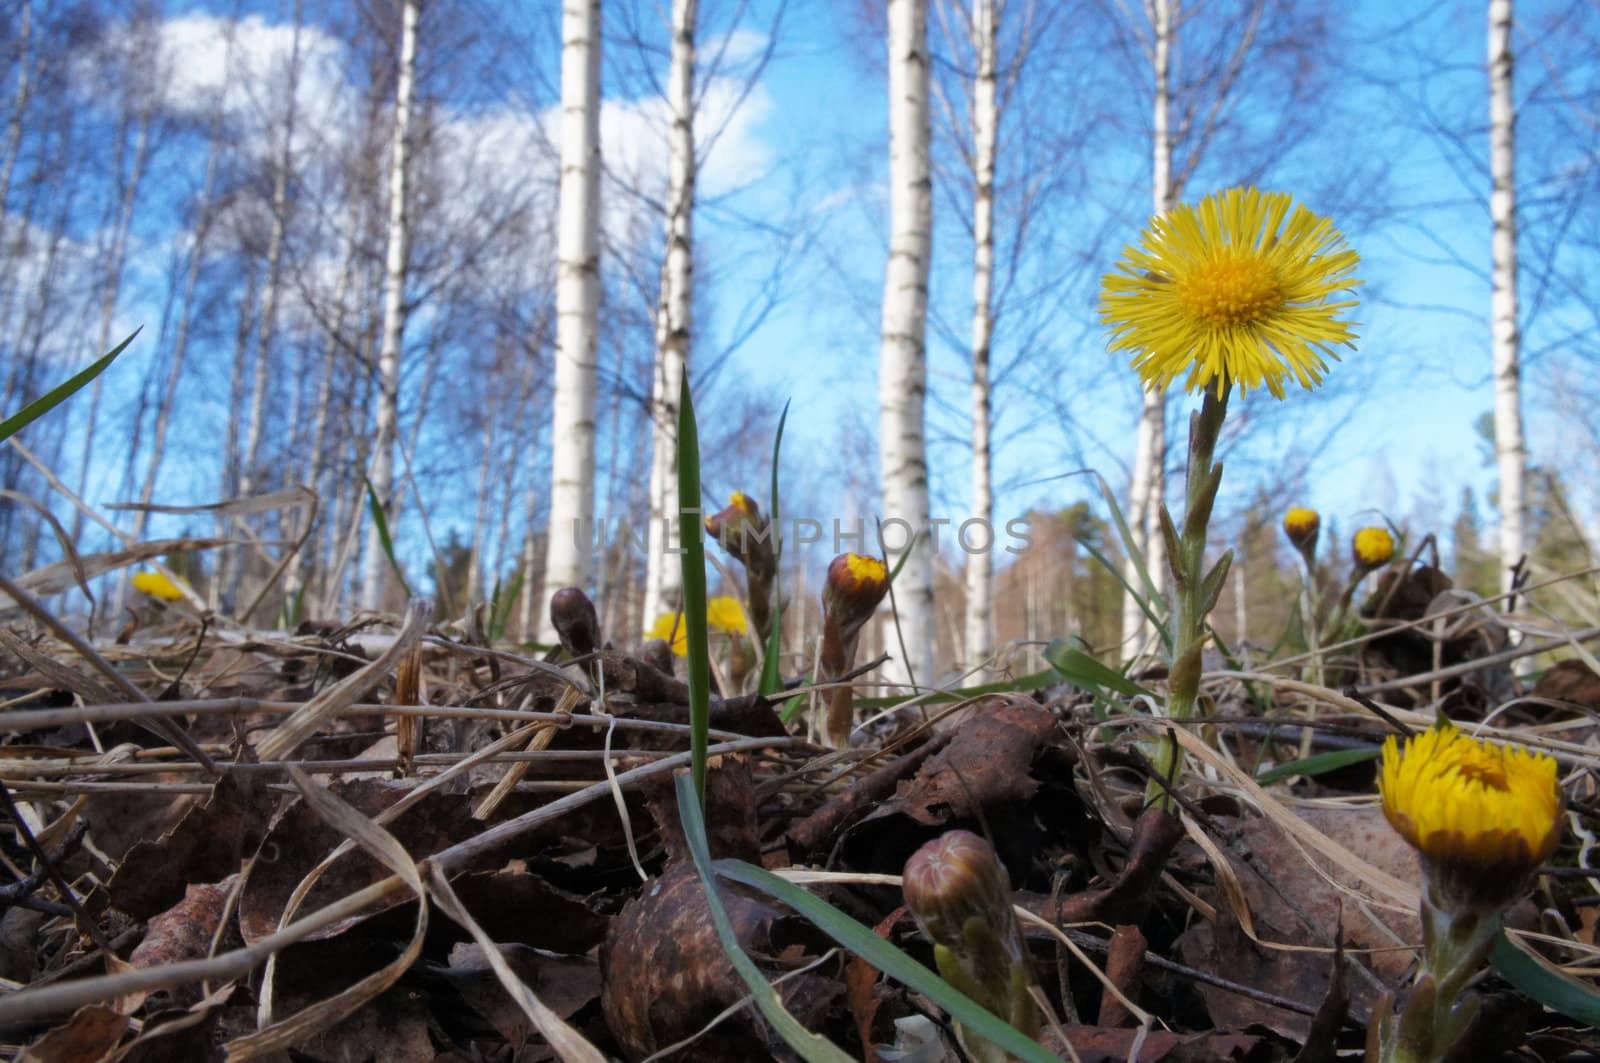 A yellow flower that comes up early on in the spring and is called Tussilago